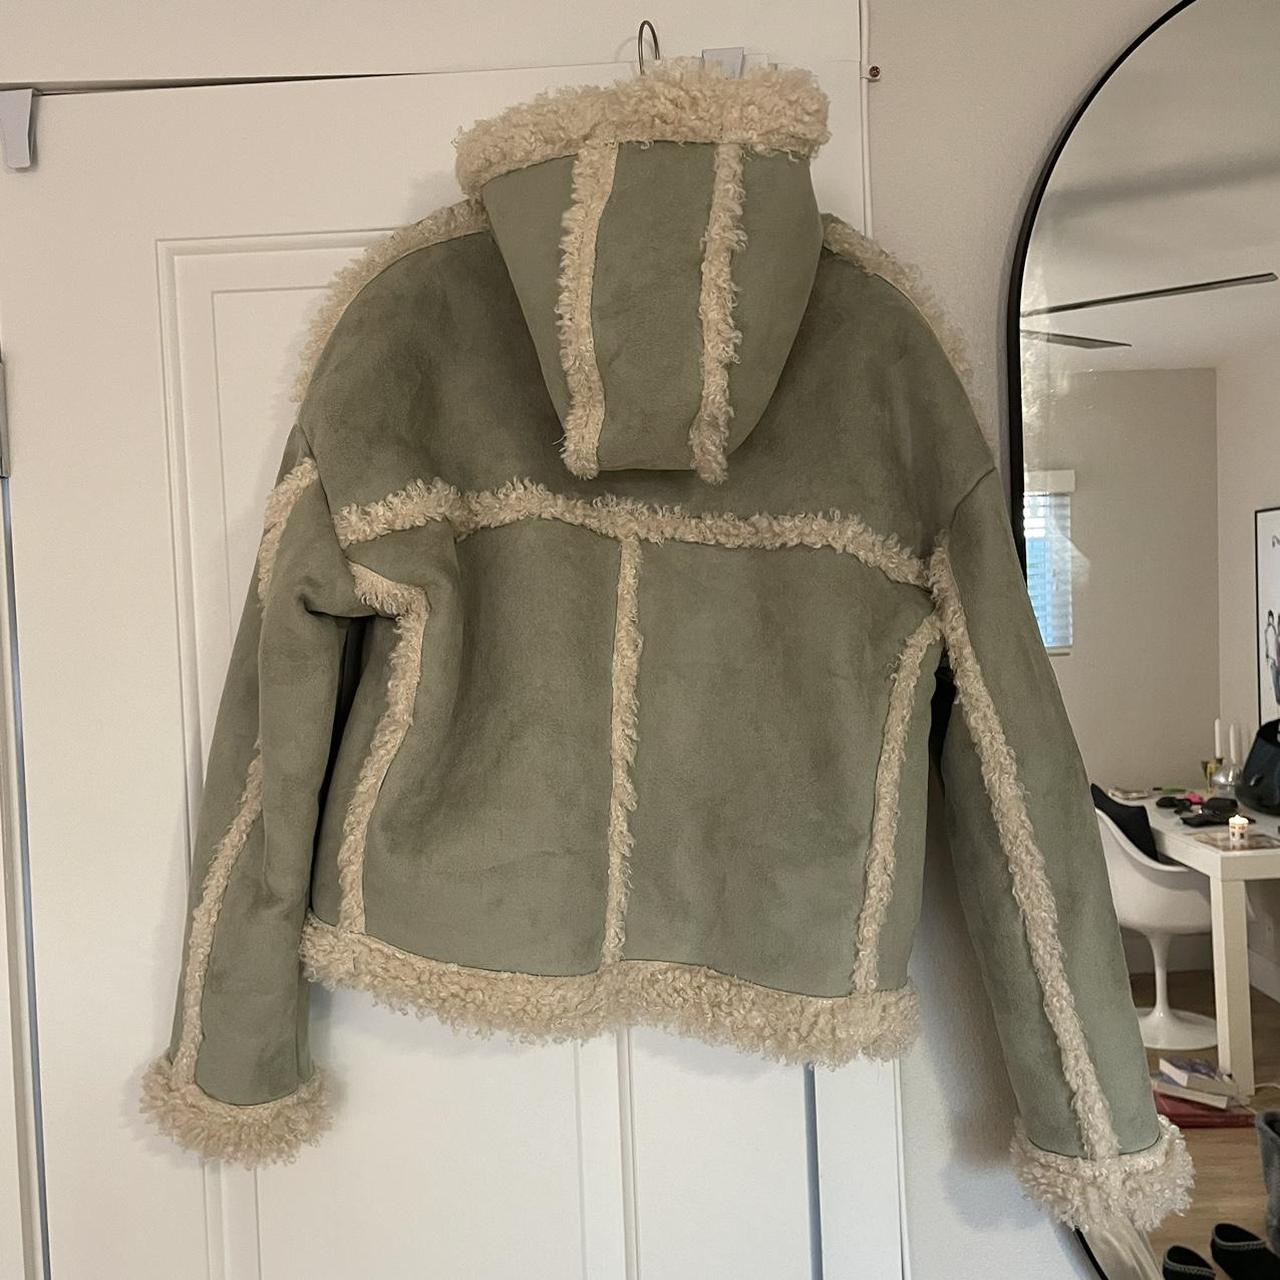 Urban Outfitters Women's Jacket